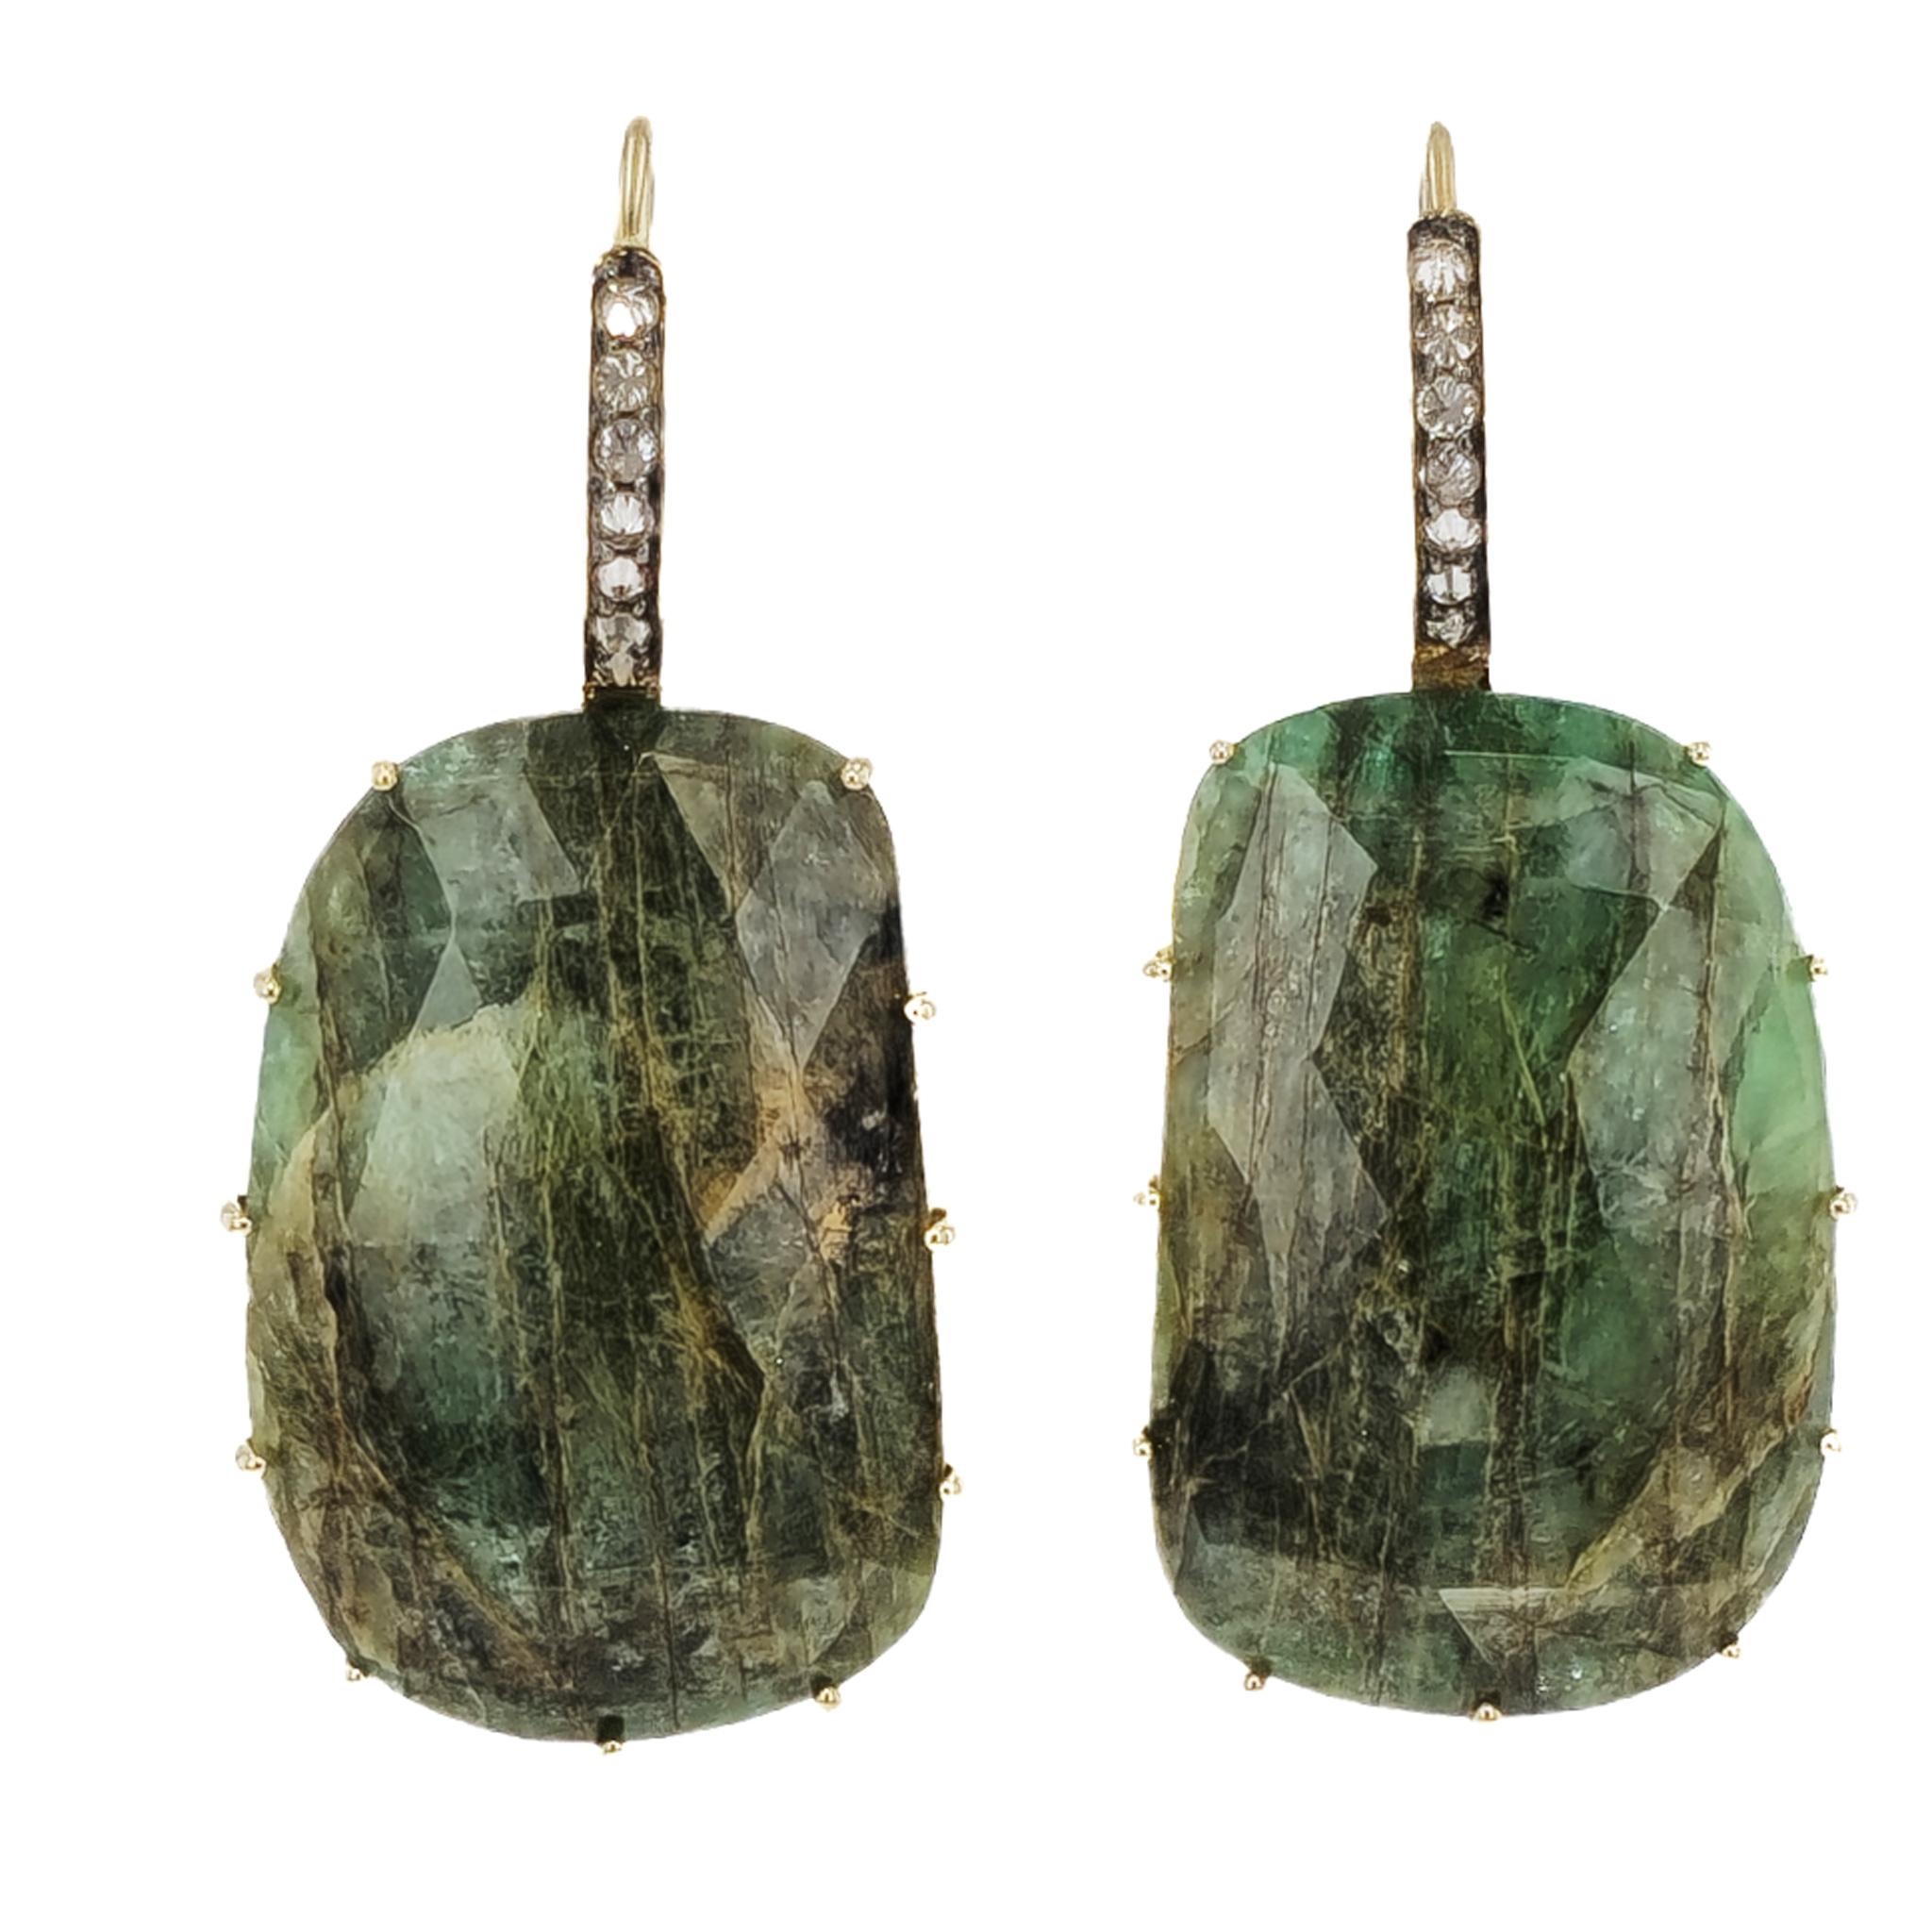 Embrace Mother Nature's finest artistry in its rawest form with this exquisite treasure that speaks directly to the soul.

Our handmade earrings showcase the raw beauty of natural Emerald Slices, imbued with the traces of the earth itself.

Each